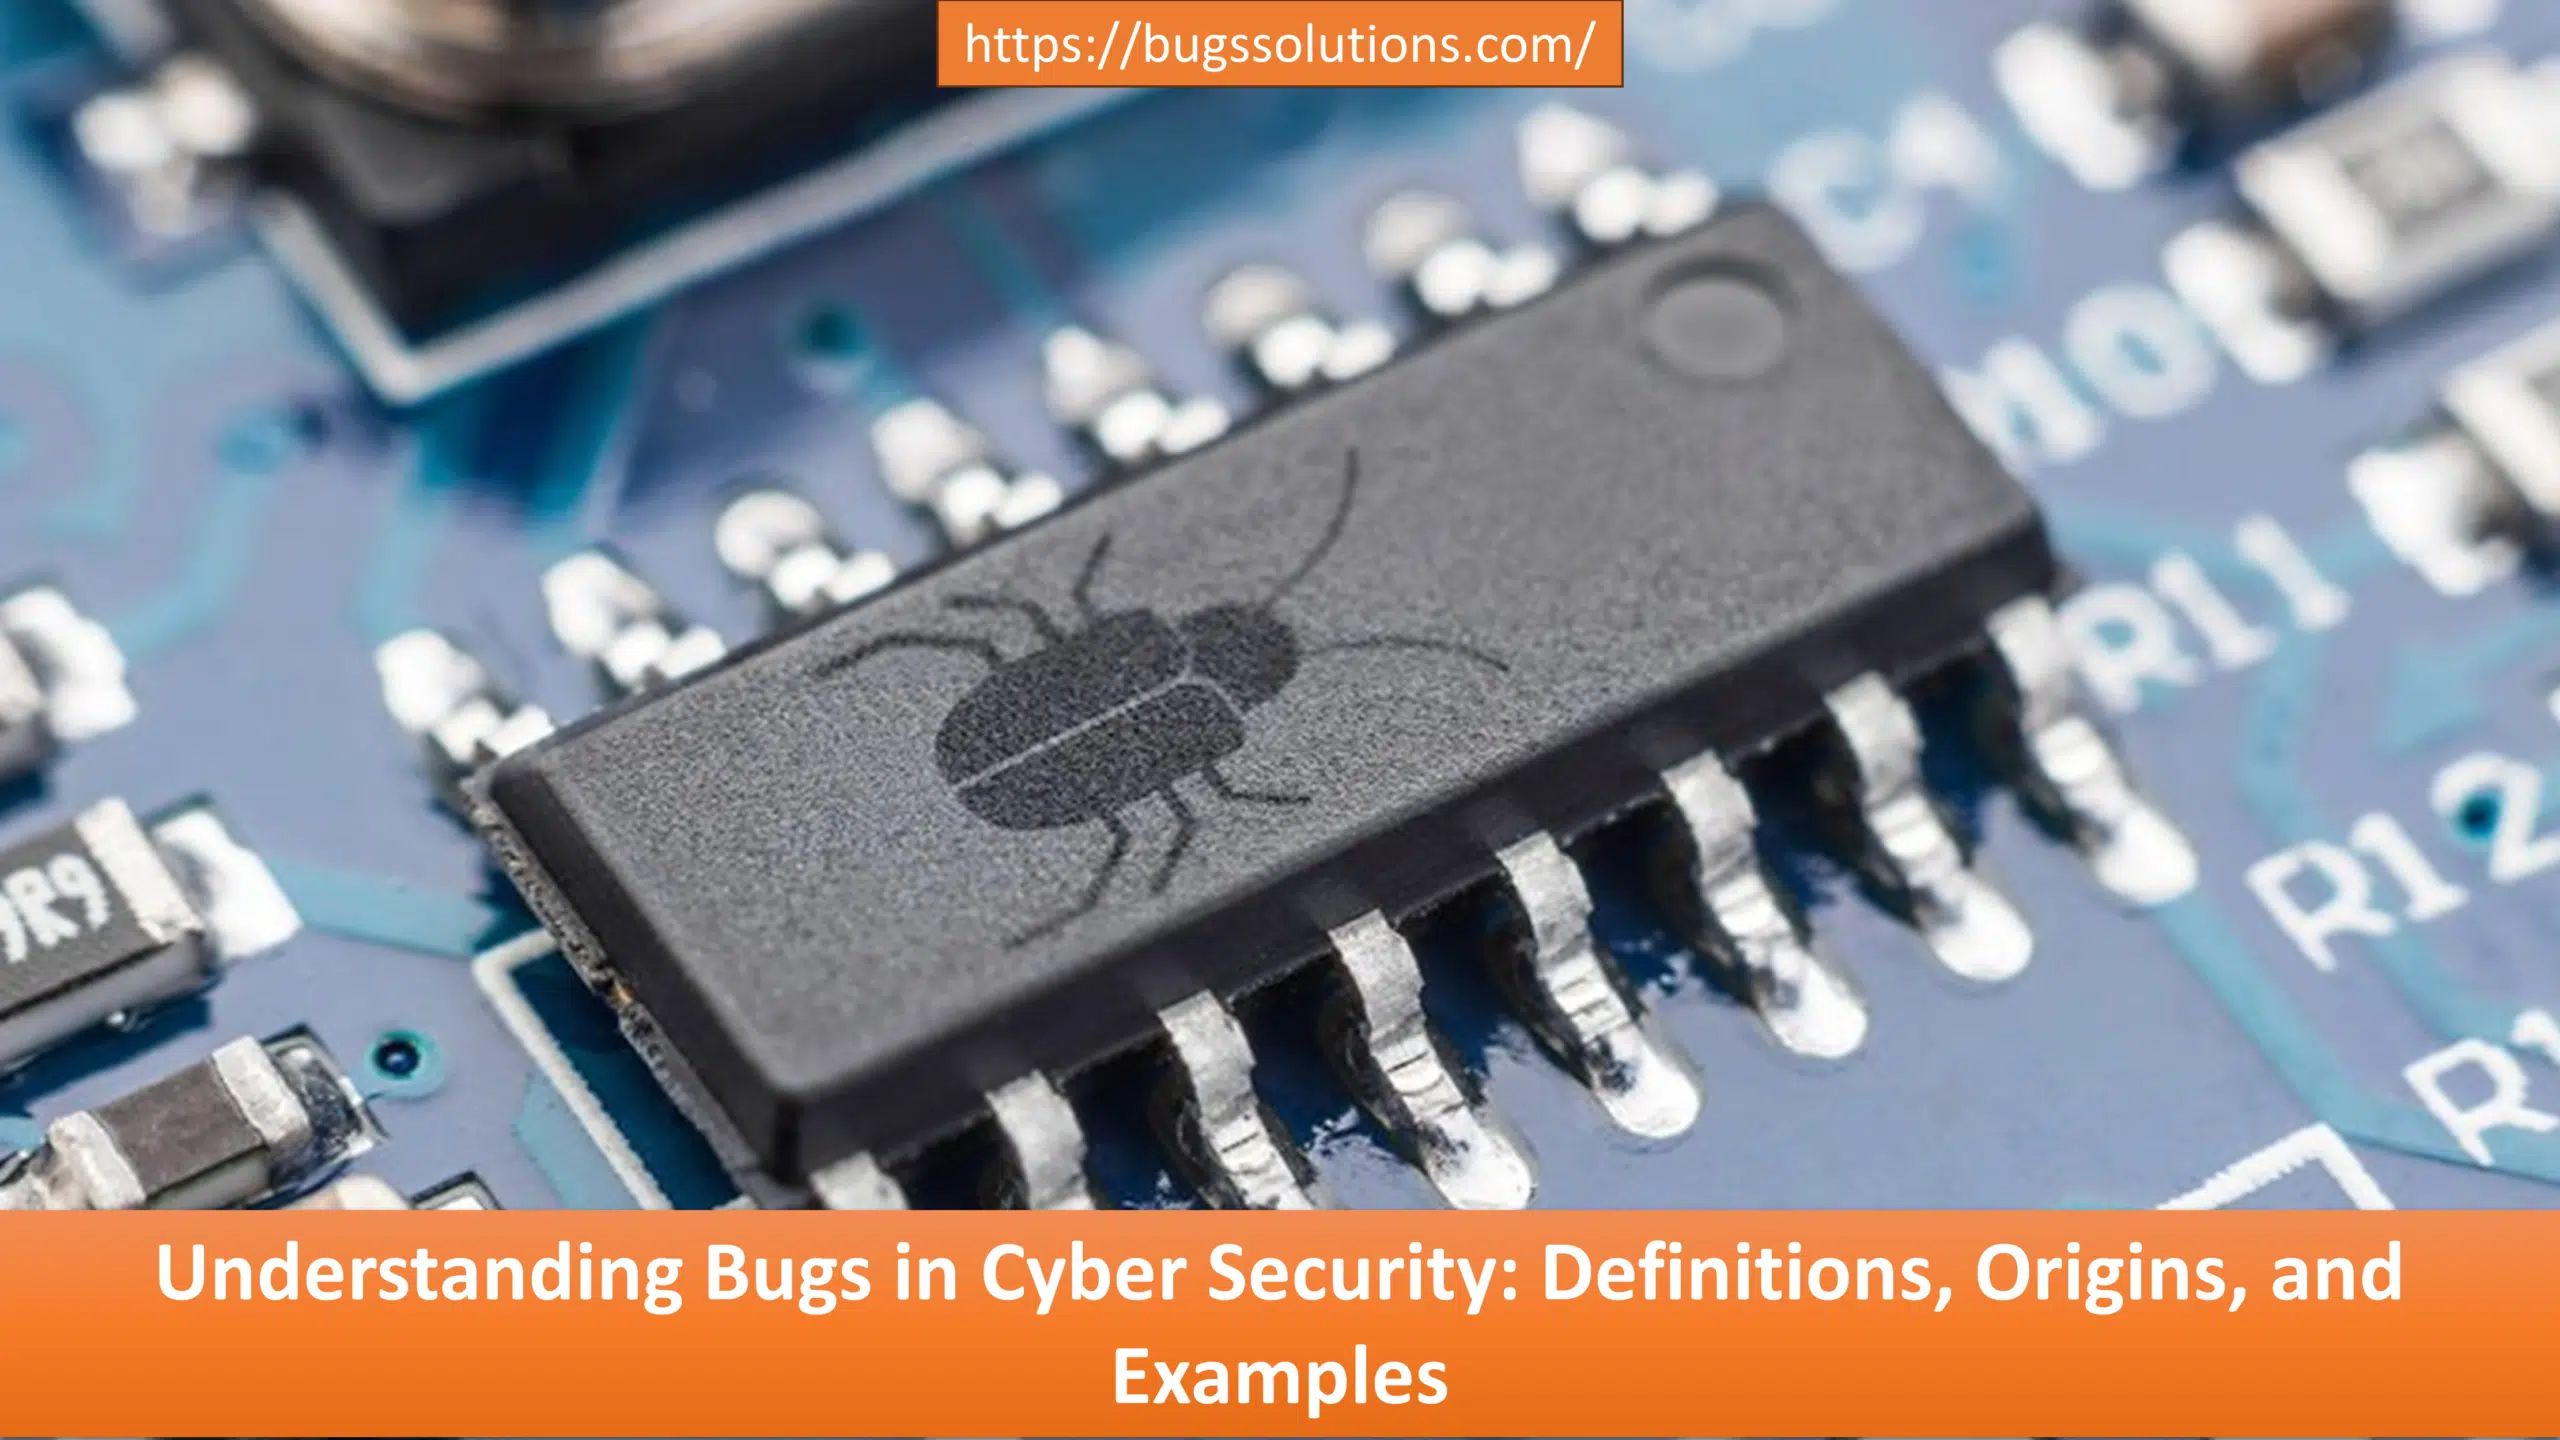 Understanding Bugs in Cyber Security Definitions, Origins, and Examples